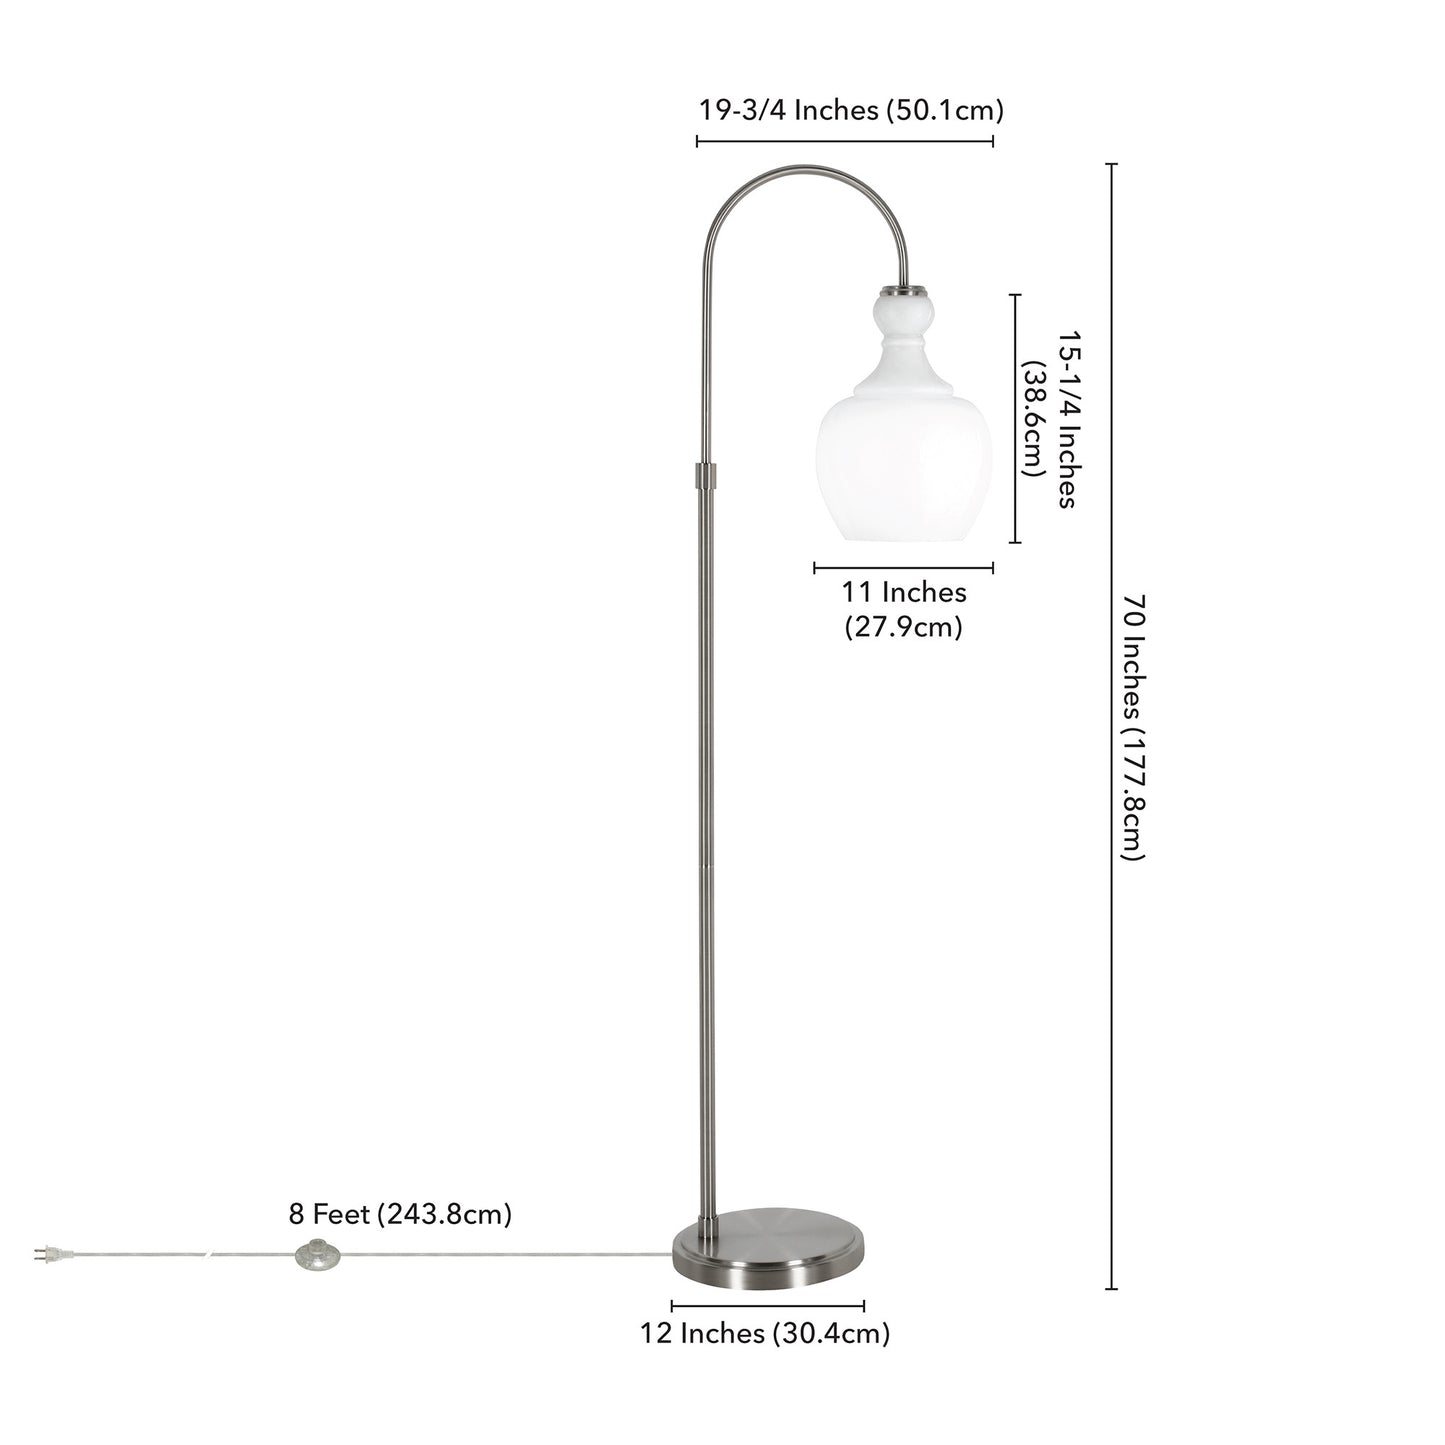 70" Nickel Arched Floor Lamp With White Frosted Glass Dome Shade